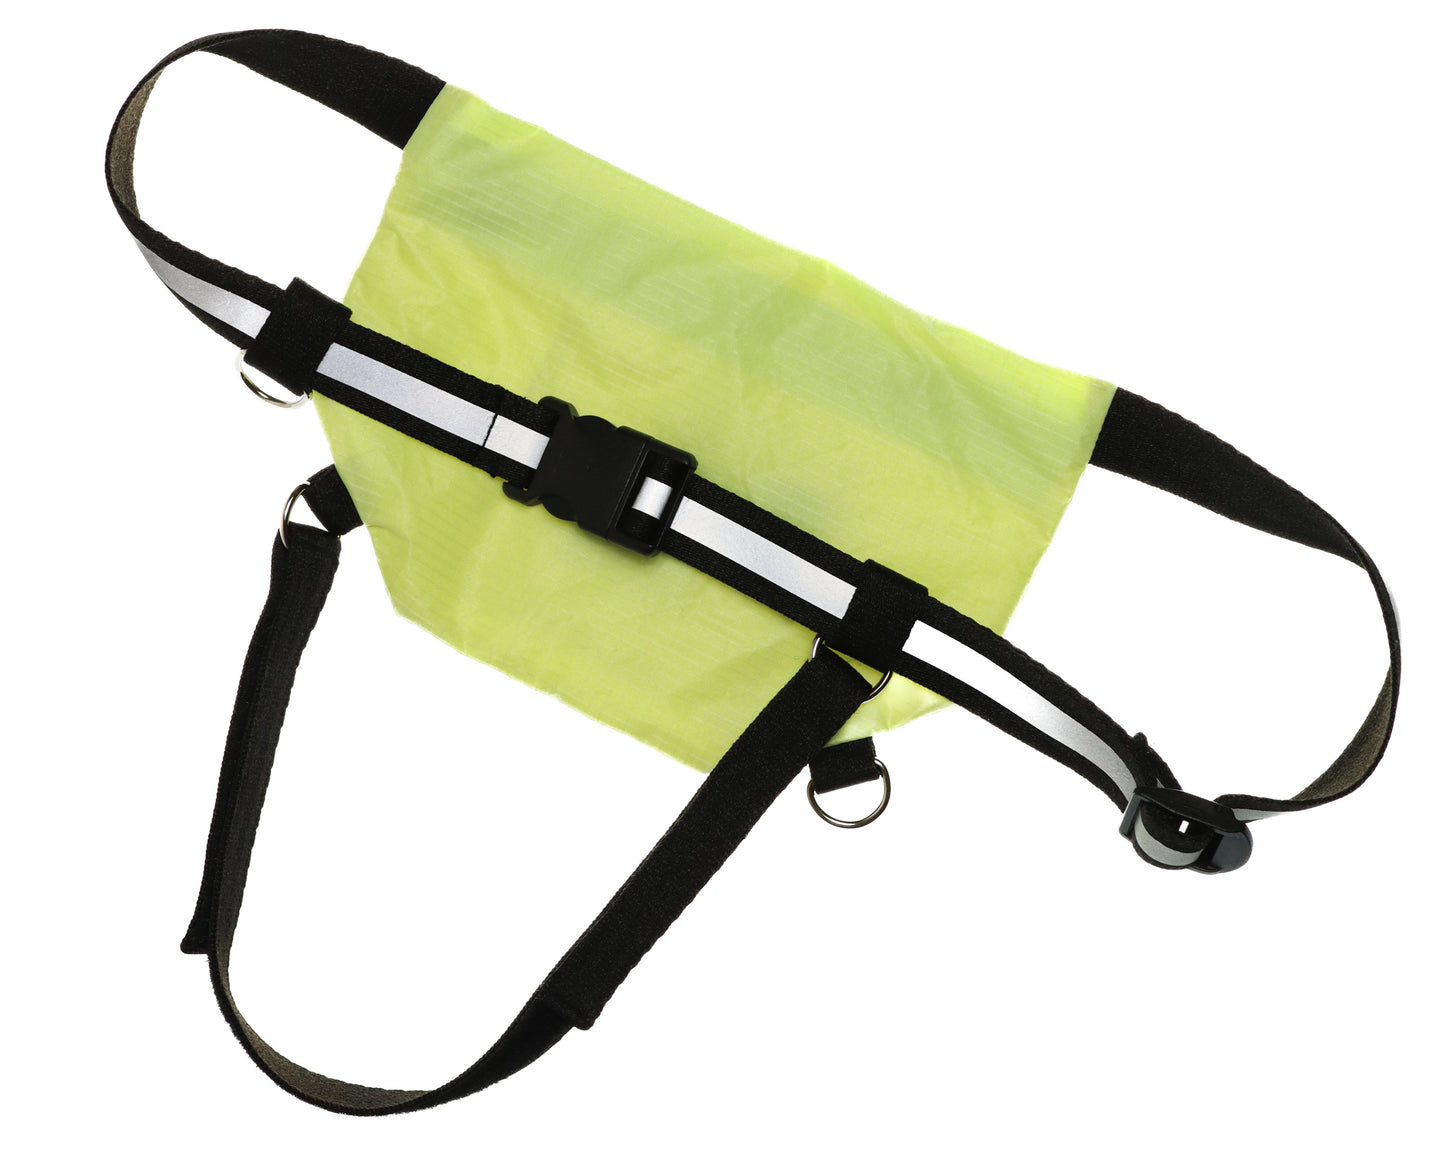 SPORT.BAG in neon yellow flat lay with reflective T strap viewed from back